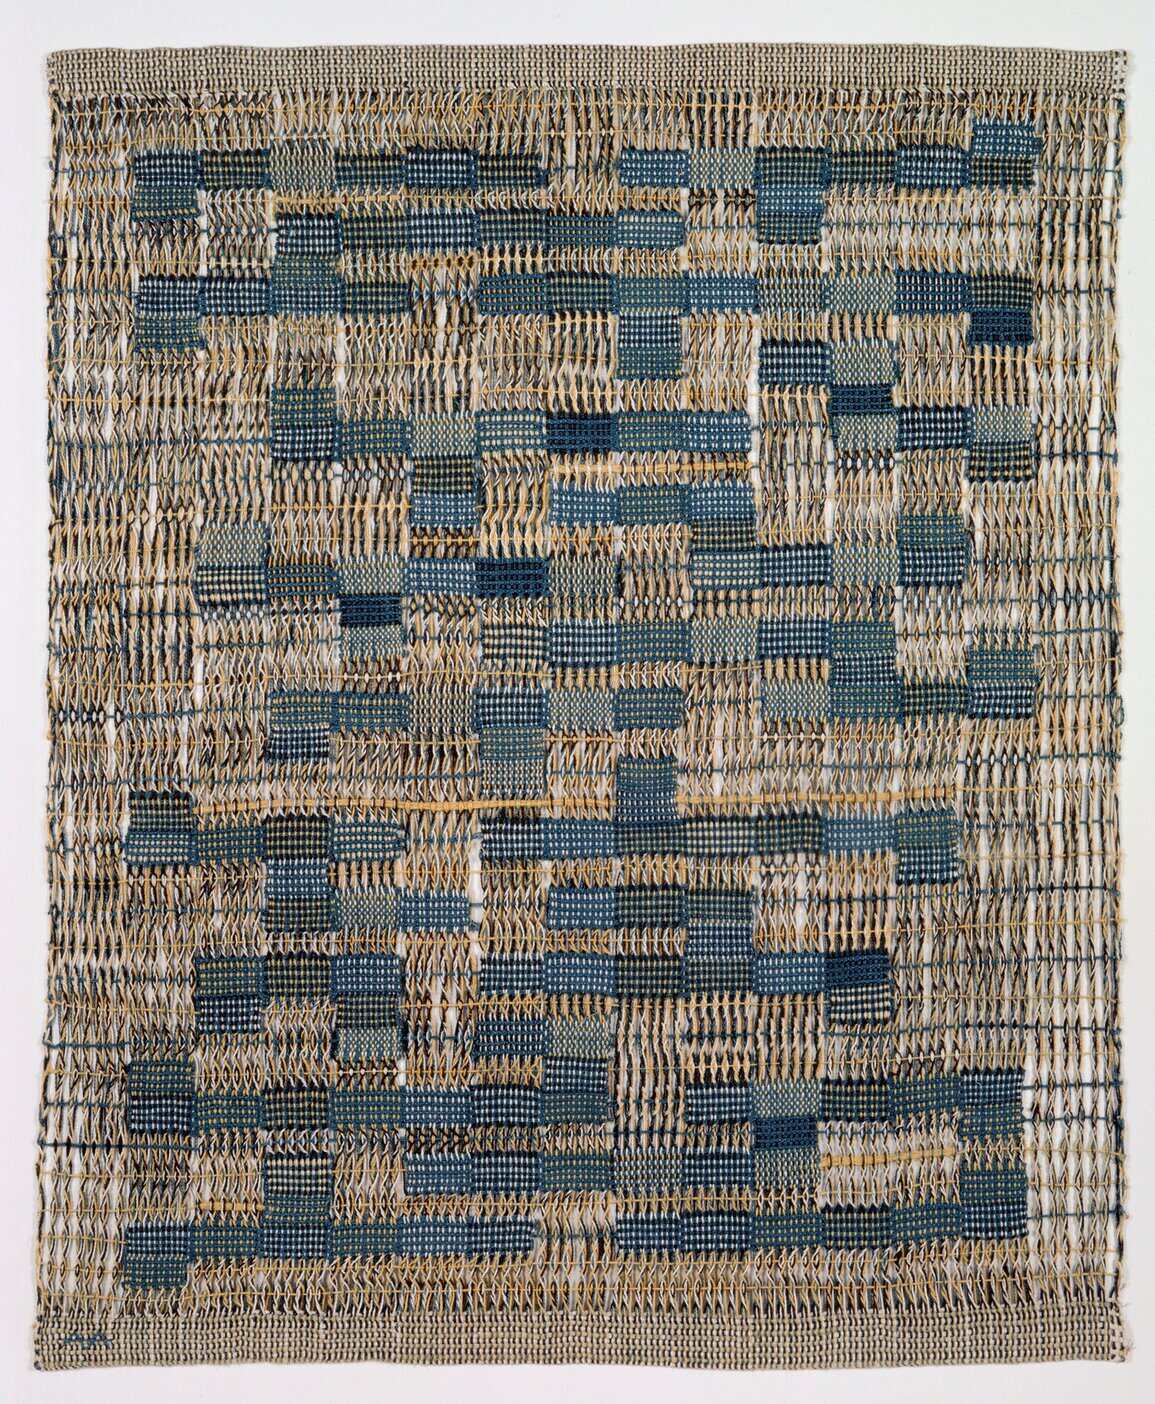 Tikal by Anni Albers